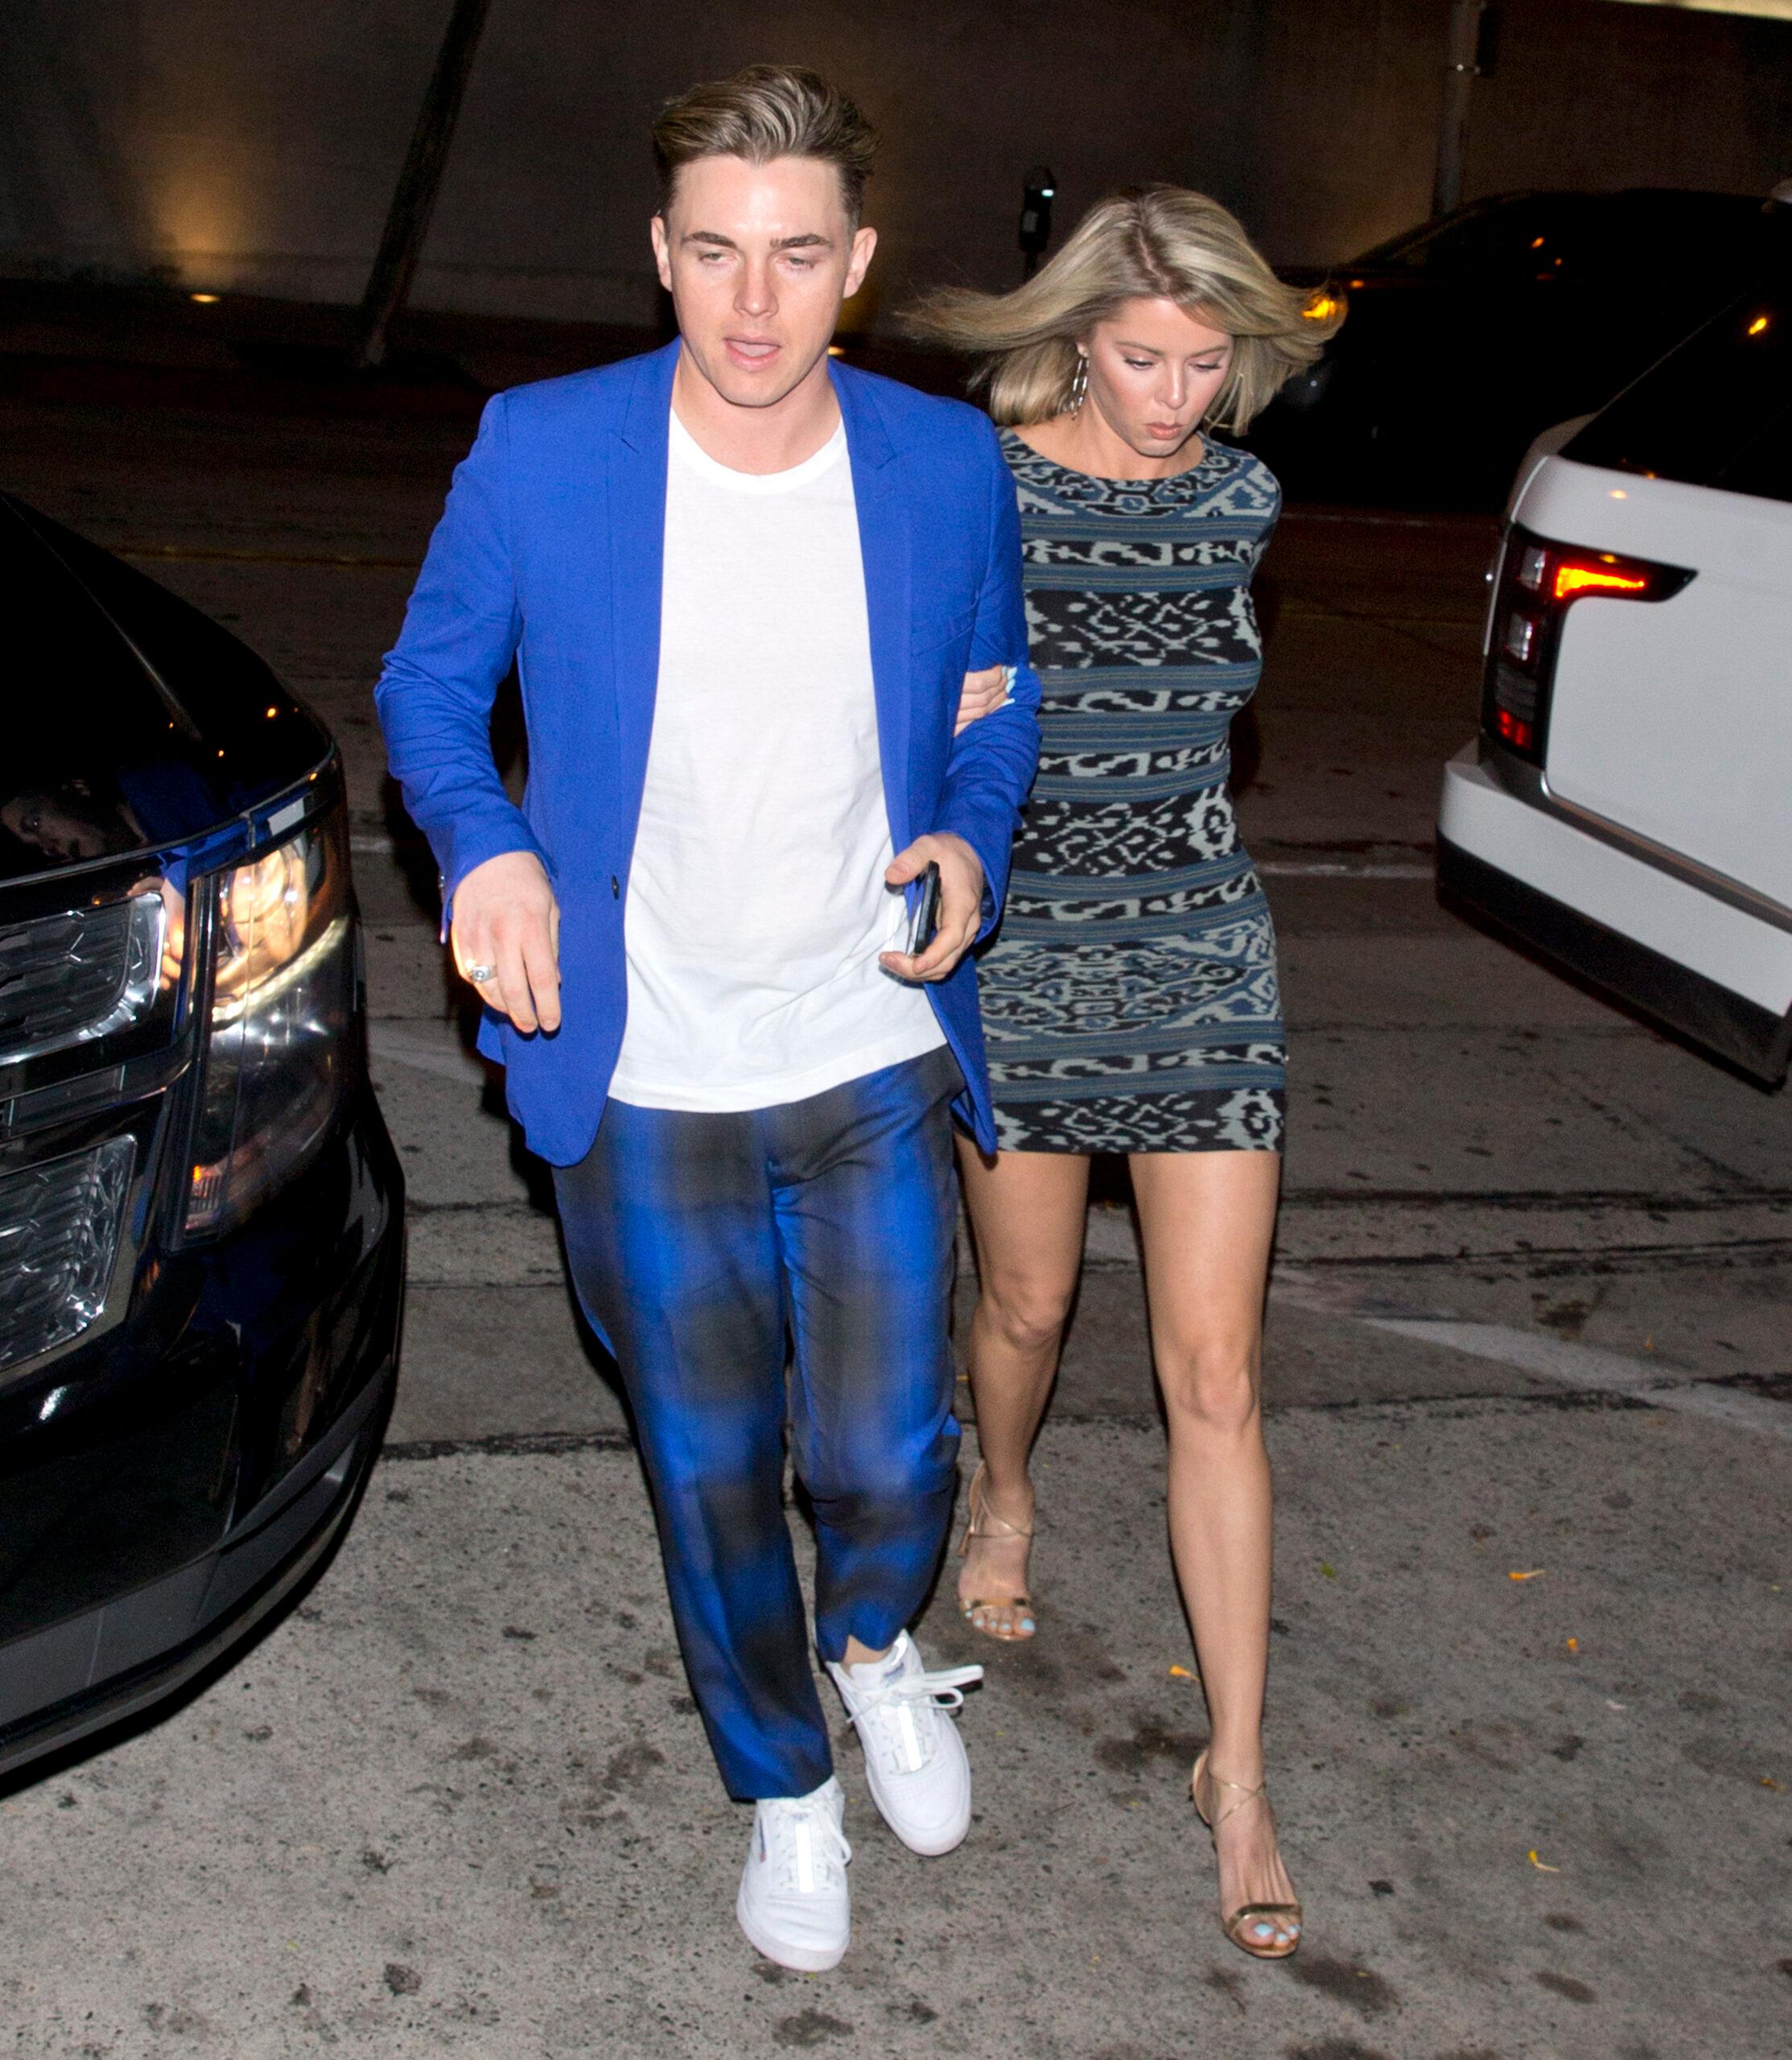 Jessie McCartney and his girlfriend were seen arriving dinner at apos Craigs apos Restaurant in West Hollywood CA